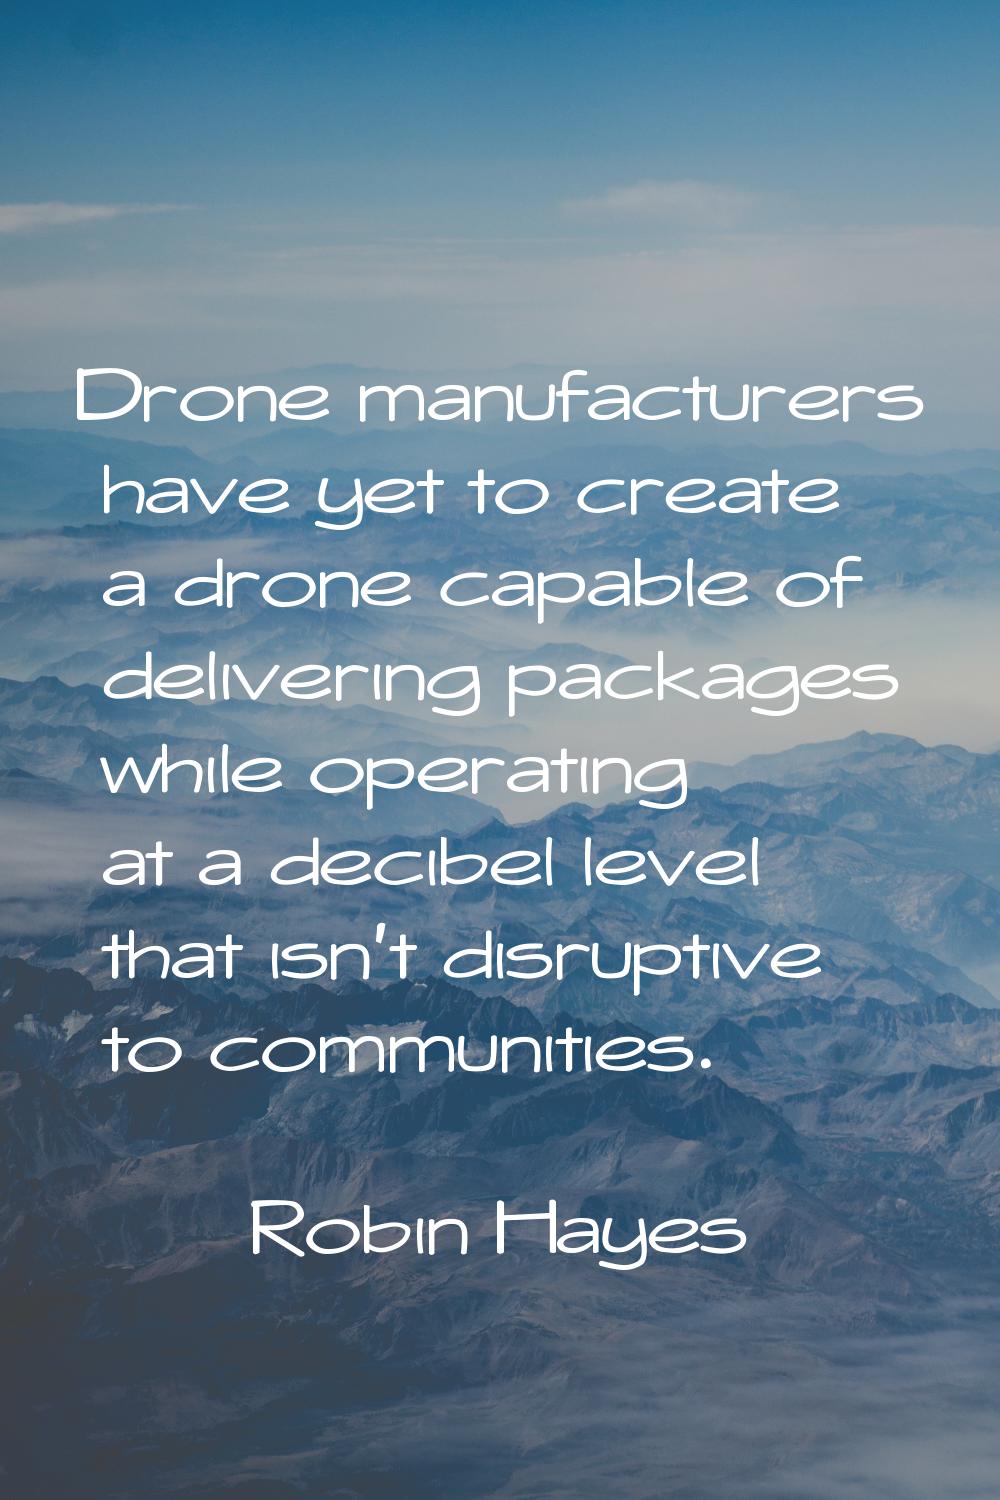 Drone manufacturers have yet to create a drone capable of delivering packages while operating at a 